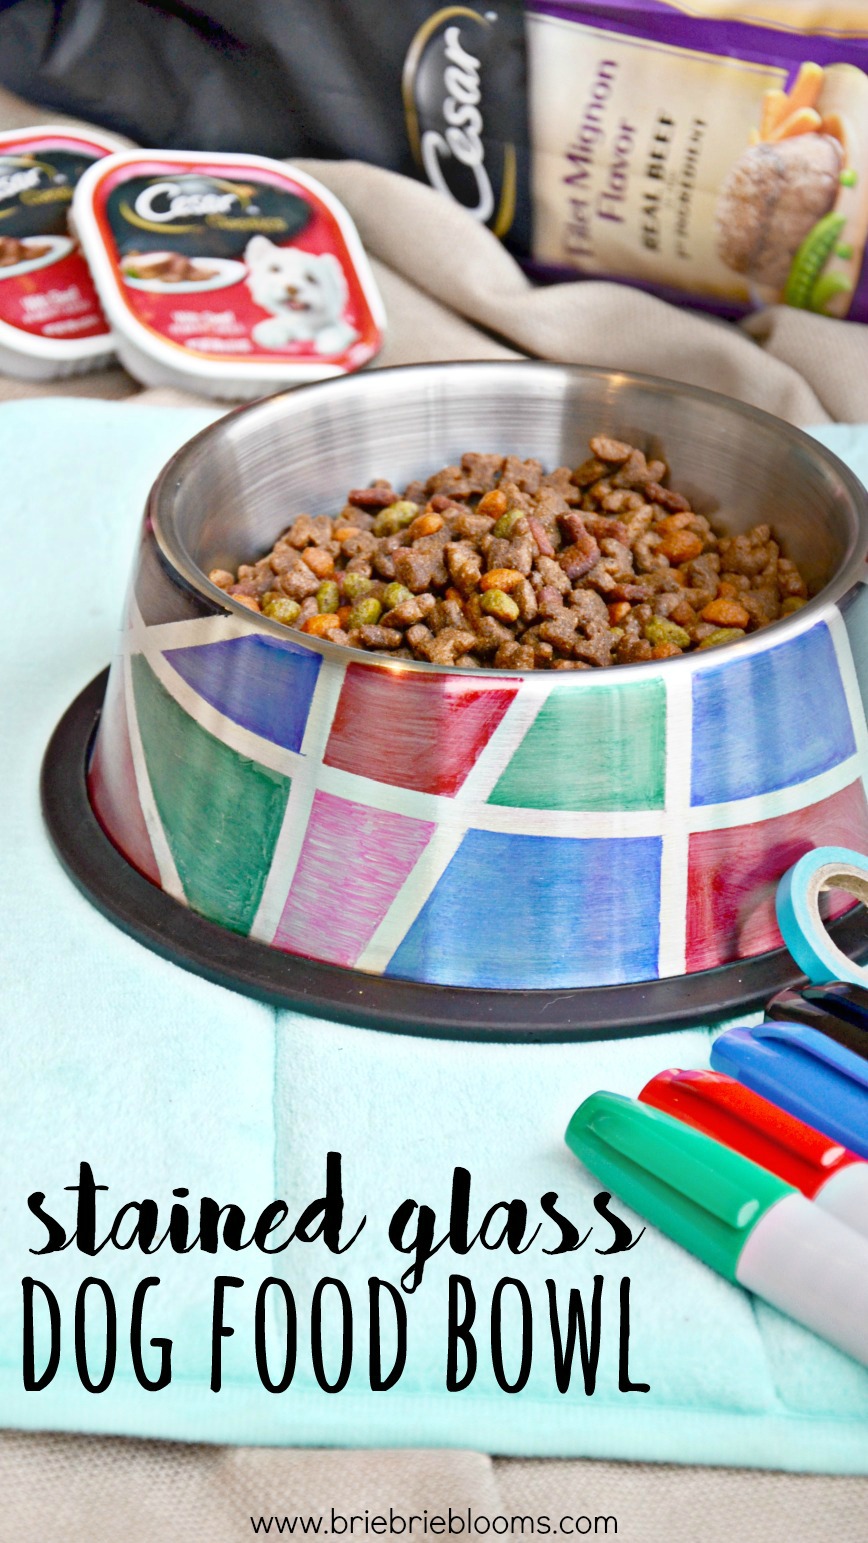 DIY Stained Glass Dog Food Bowl tutorial